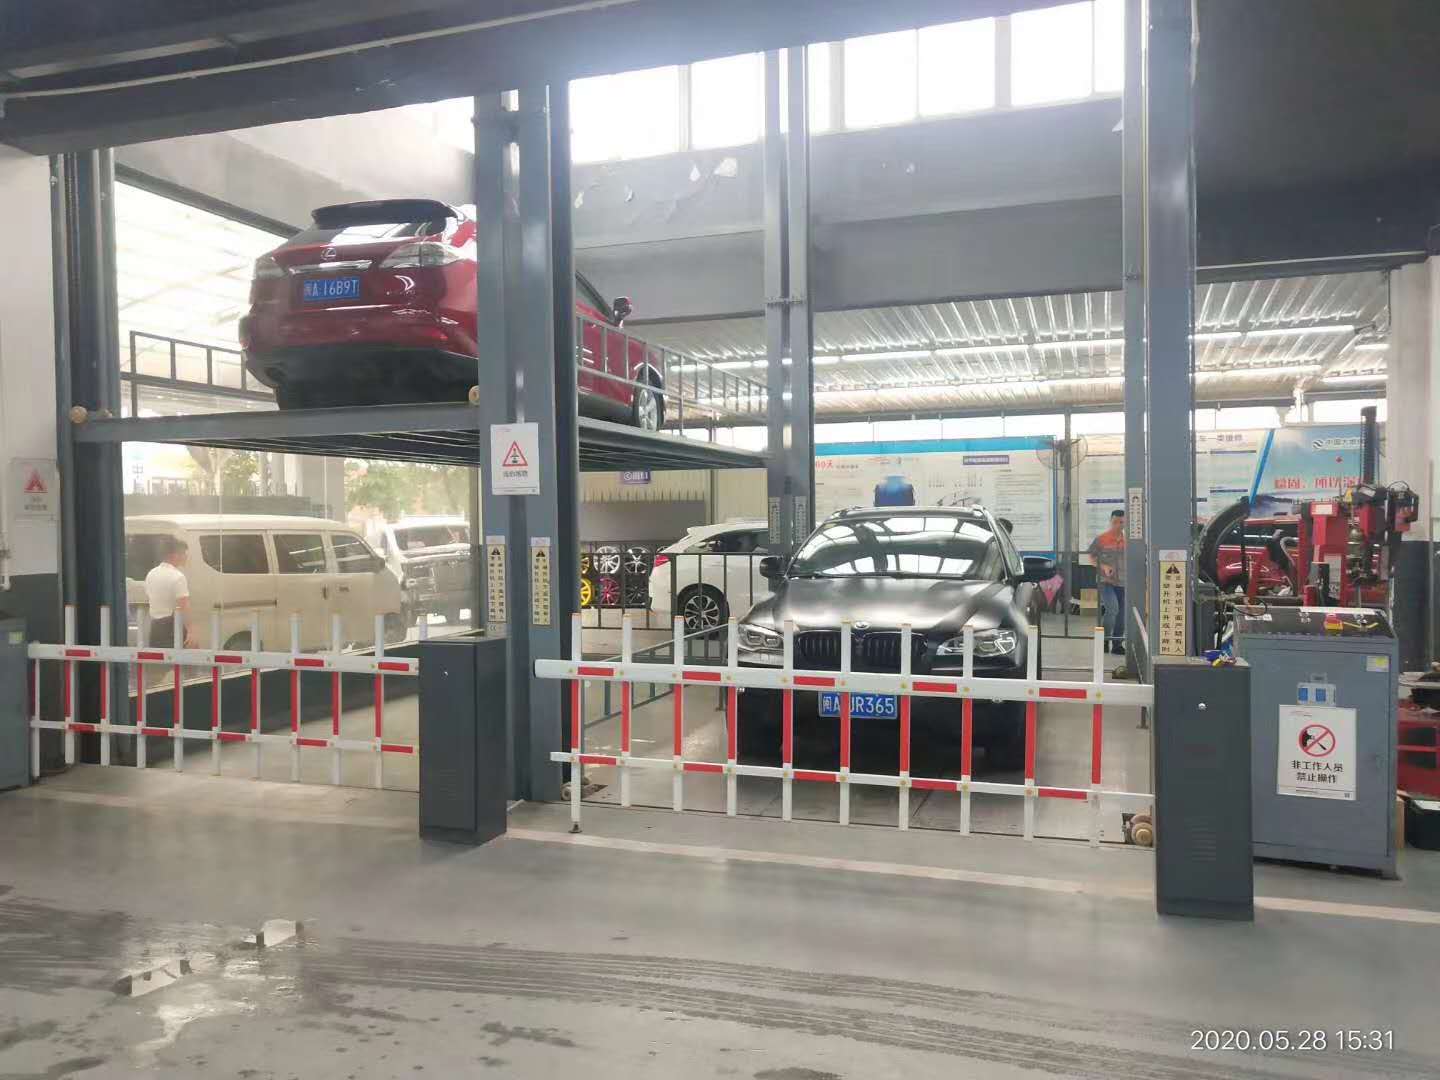 What should be paid attention to when using the car lift platform